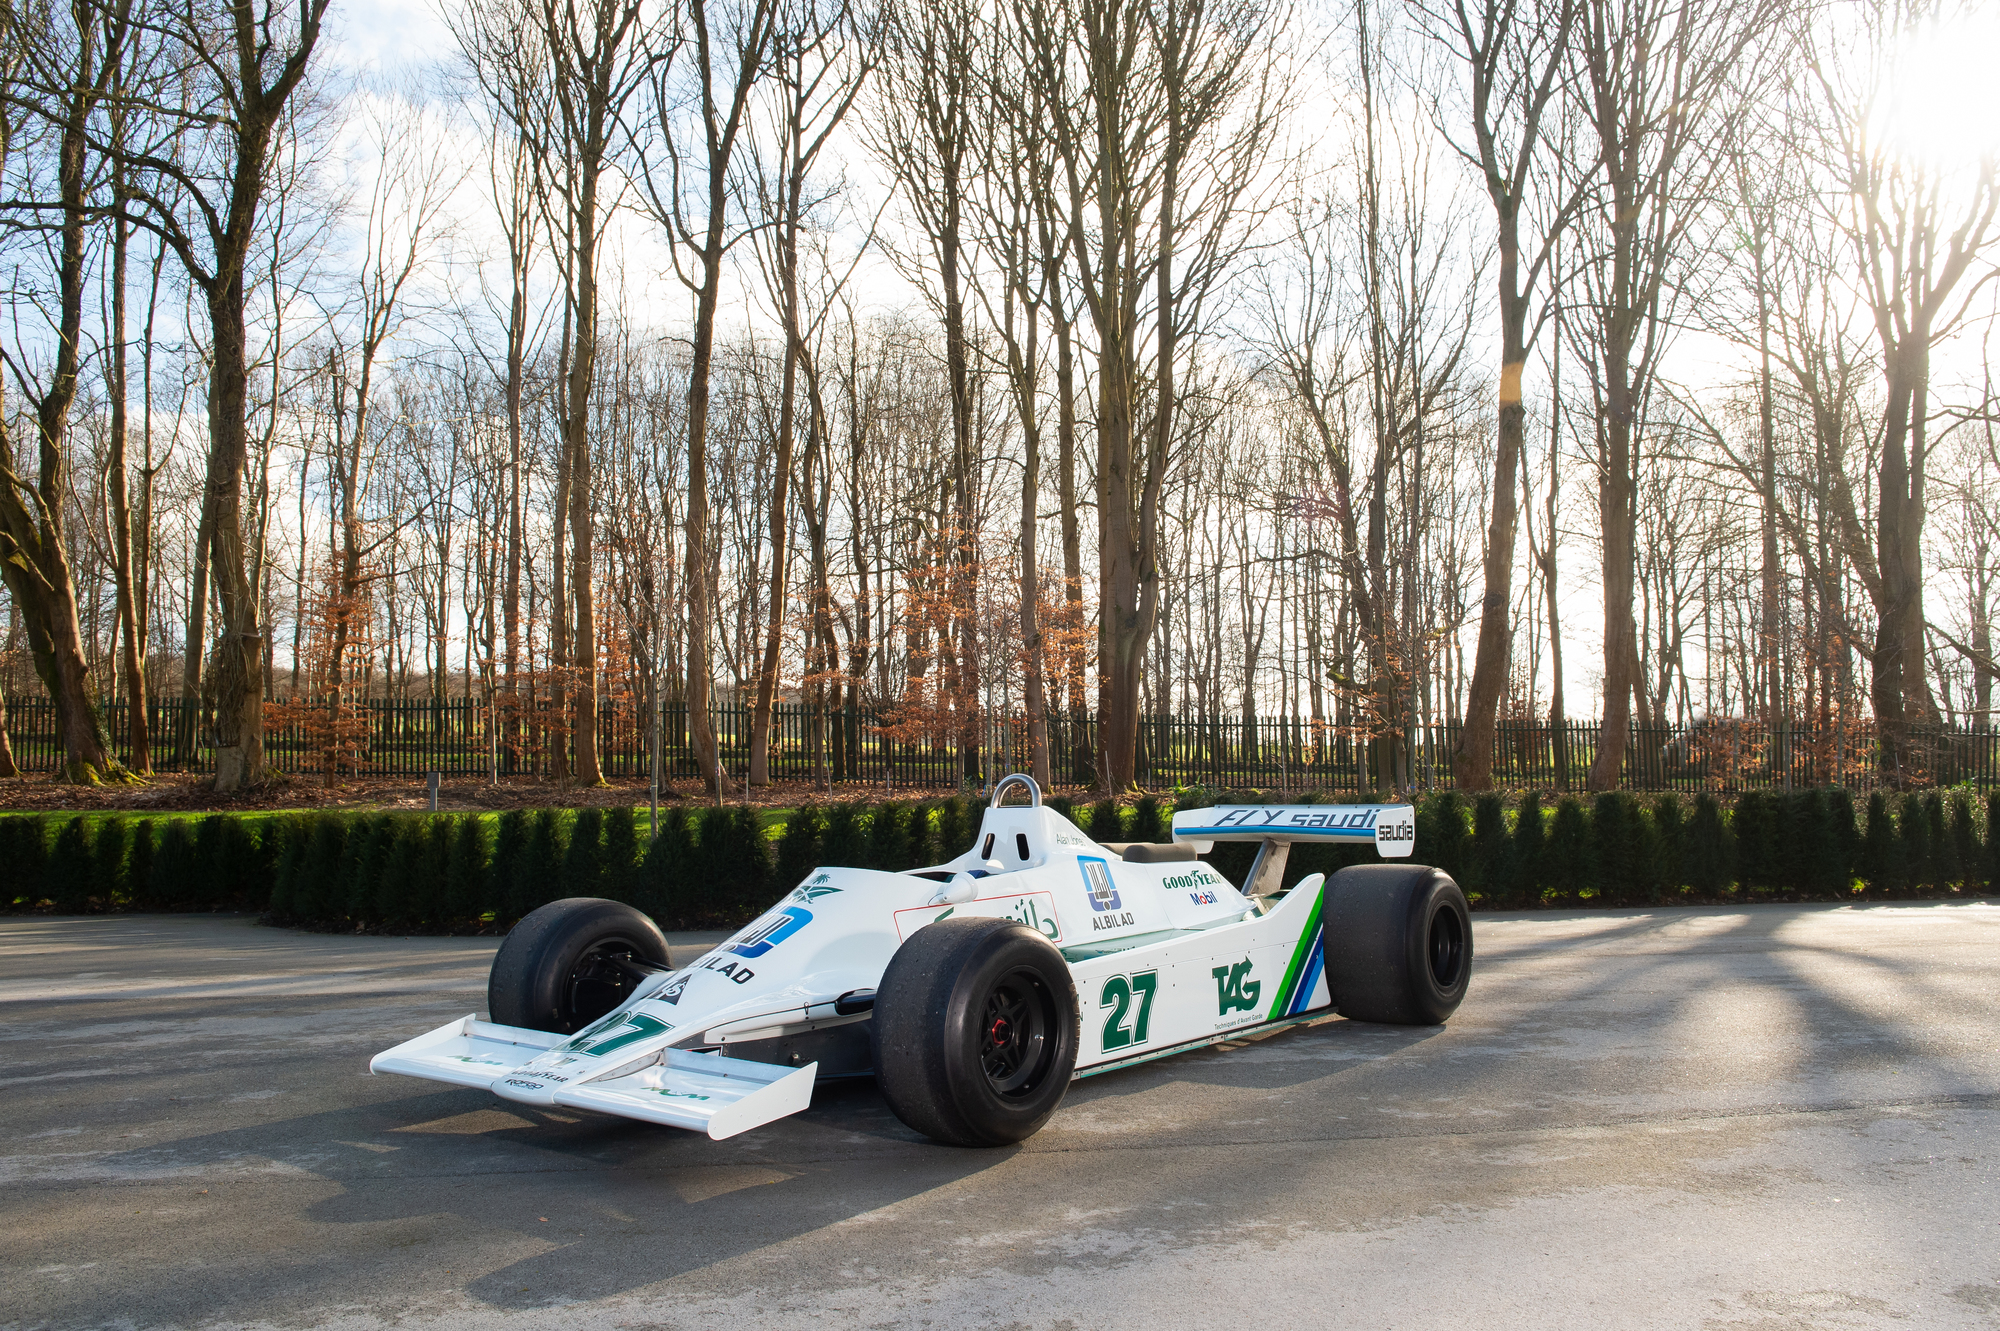 1979 Williams-Ford FW07 - chassis 01 - the first ever pole for 